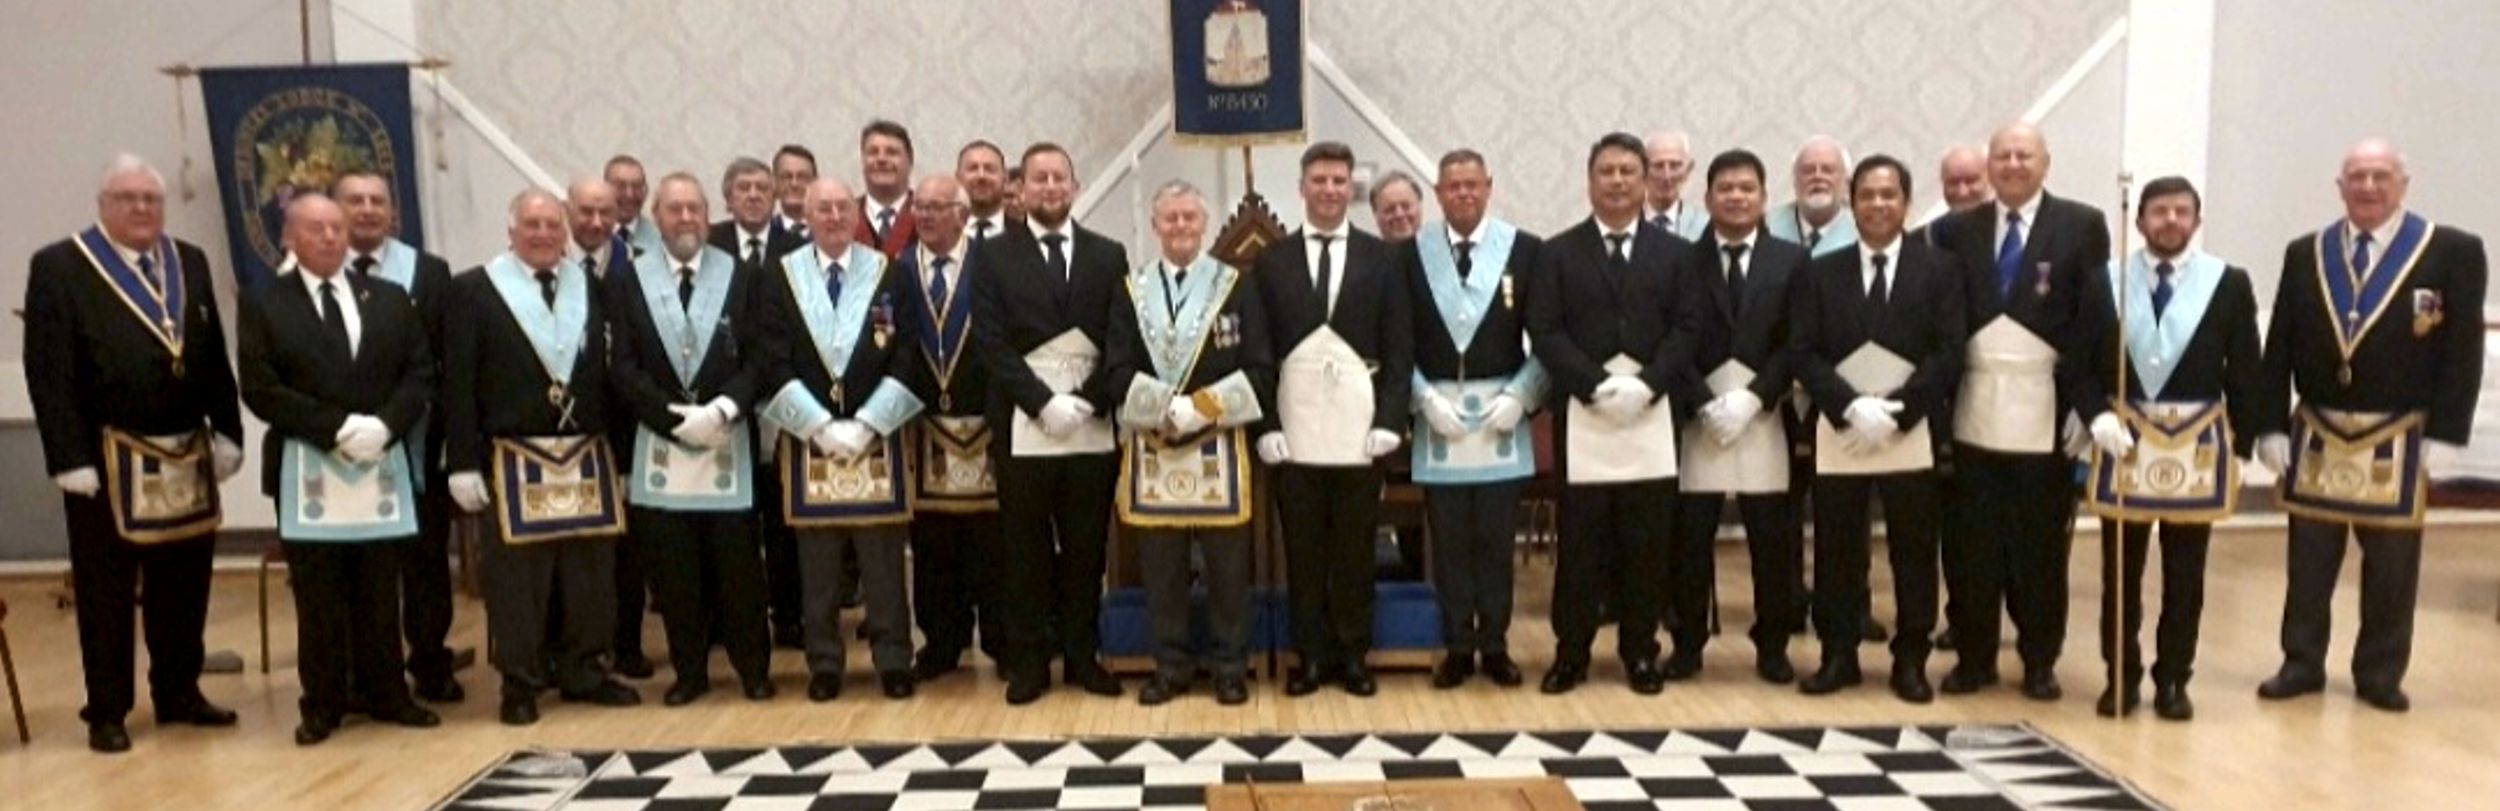 SOMPTING MASONIC LODGE - We are a Freemasons Lodge based at the Charmandean Centre in Worthing, West Sussex. 